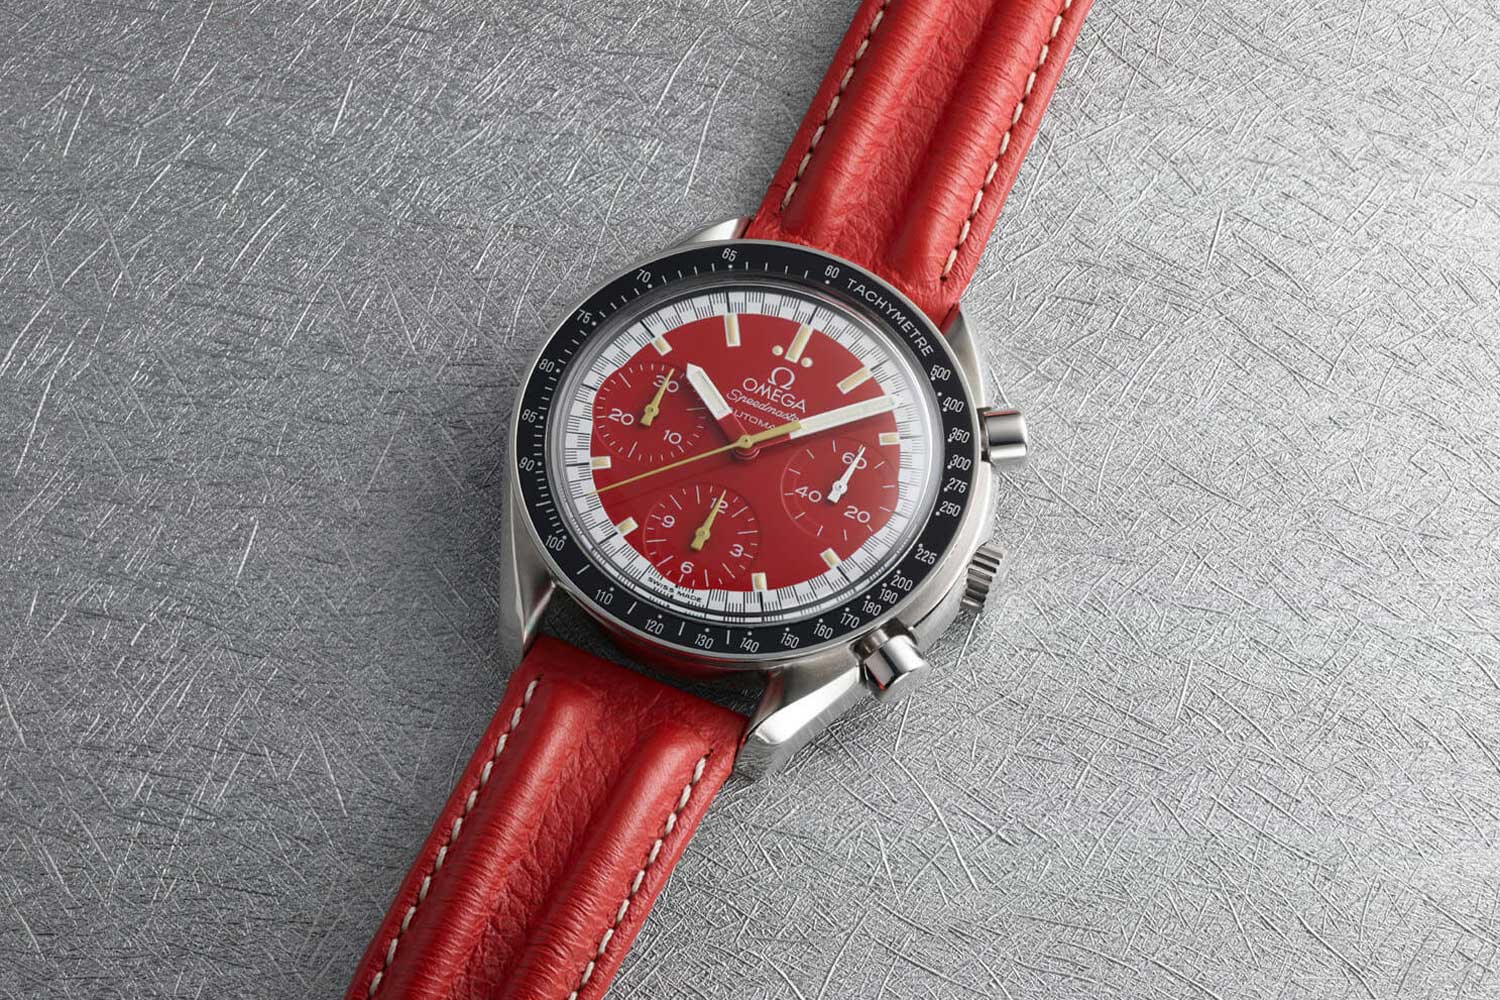 1996 Racing Speedmaster Reduced Launched by Michael Schumacher on a specially produced double ridged leather strap (Image: omegawatches.com)